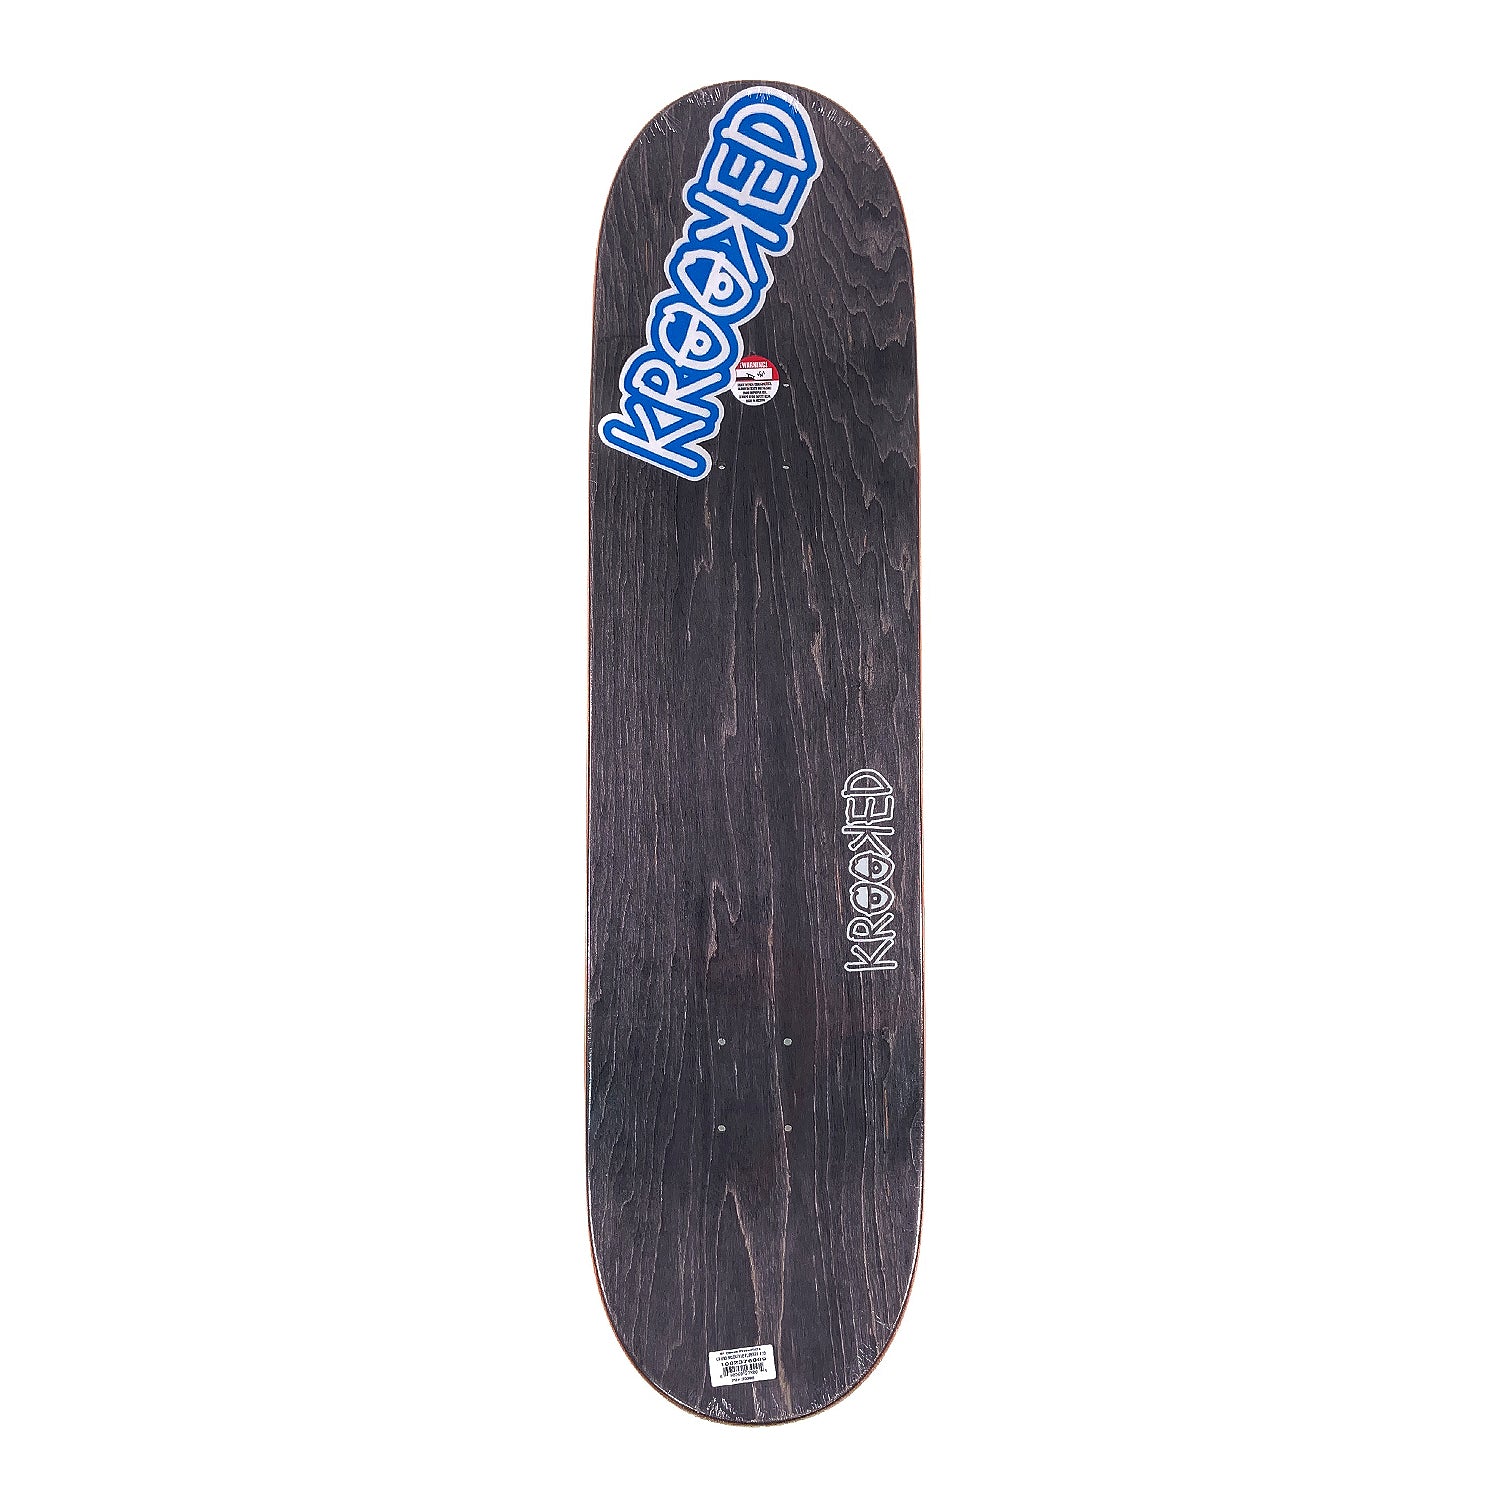 Krooked Team Wild Style Flowers Deck - 8.25" - Prime Delux Store